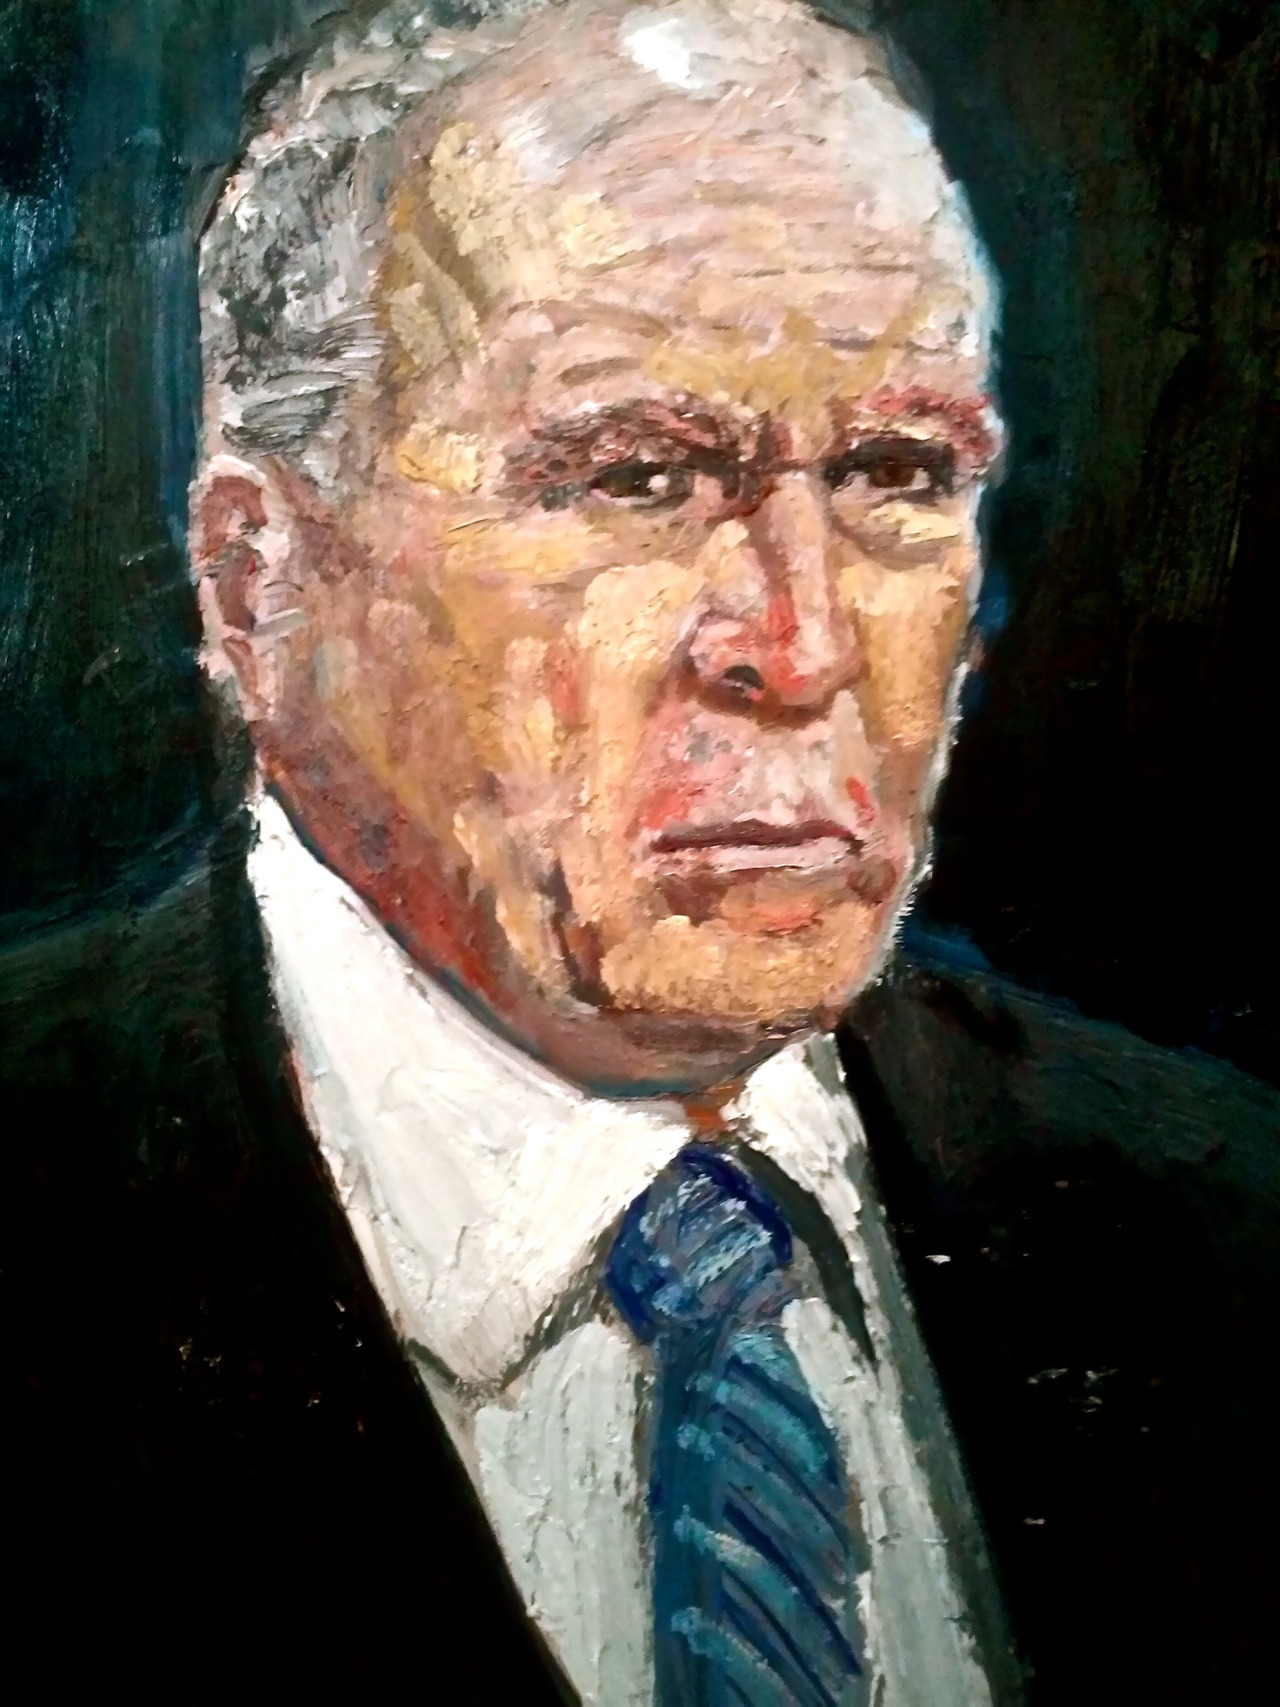 CIA Won’t Rule Out Torture, 18x24, oil on canvas, Sandra Koponen © 2015 CIA John Brennan, CIA Director 2013 to Present Although John Brennan is not responsible for implementing the CIA’s torture program, it is chilling that he will not condemn it...